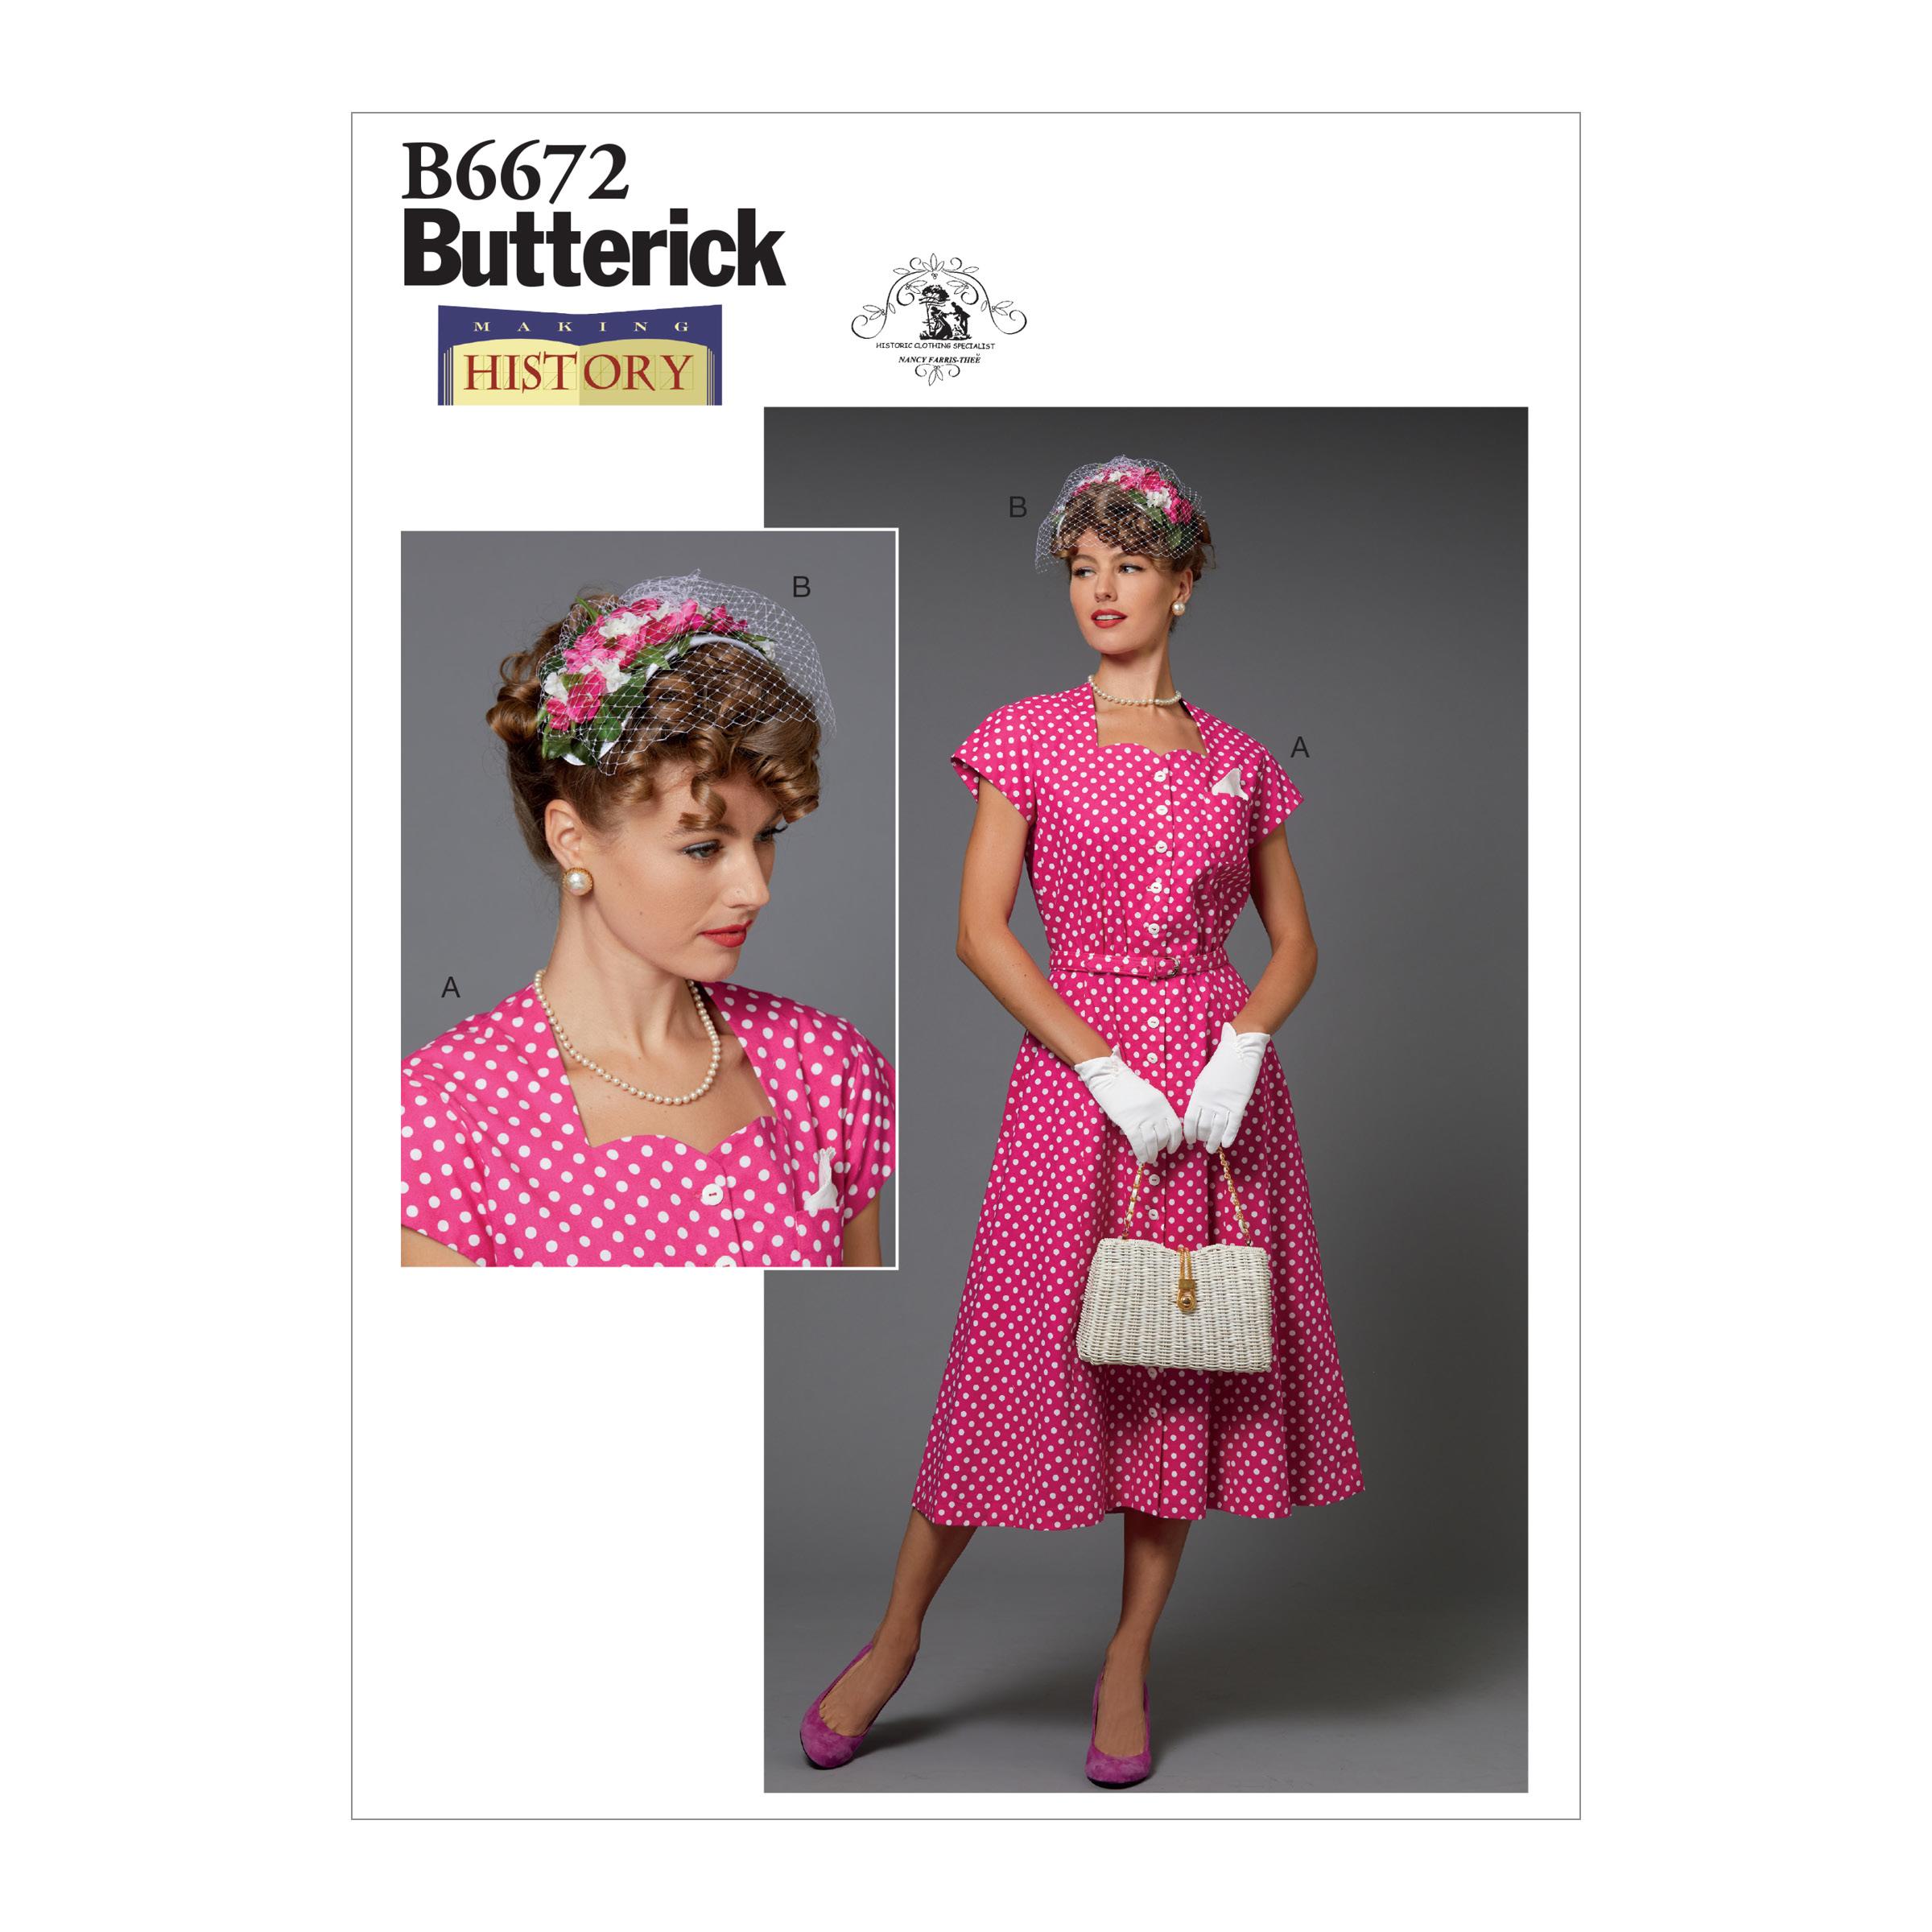 Butterick B6672 Misses' Costume and Hat